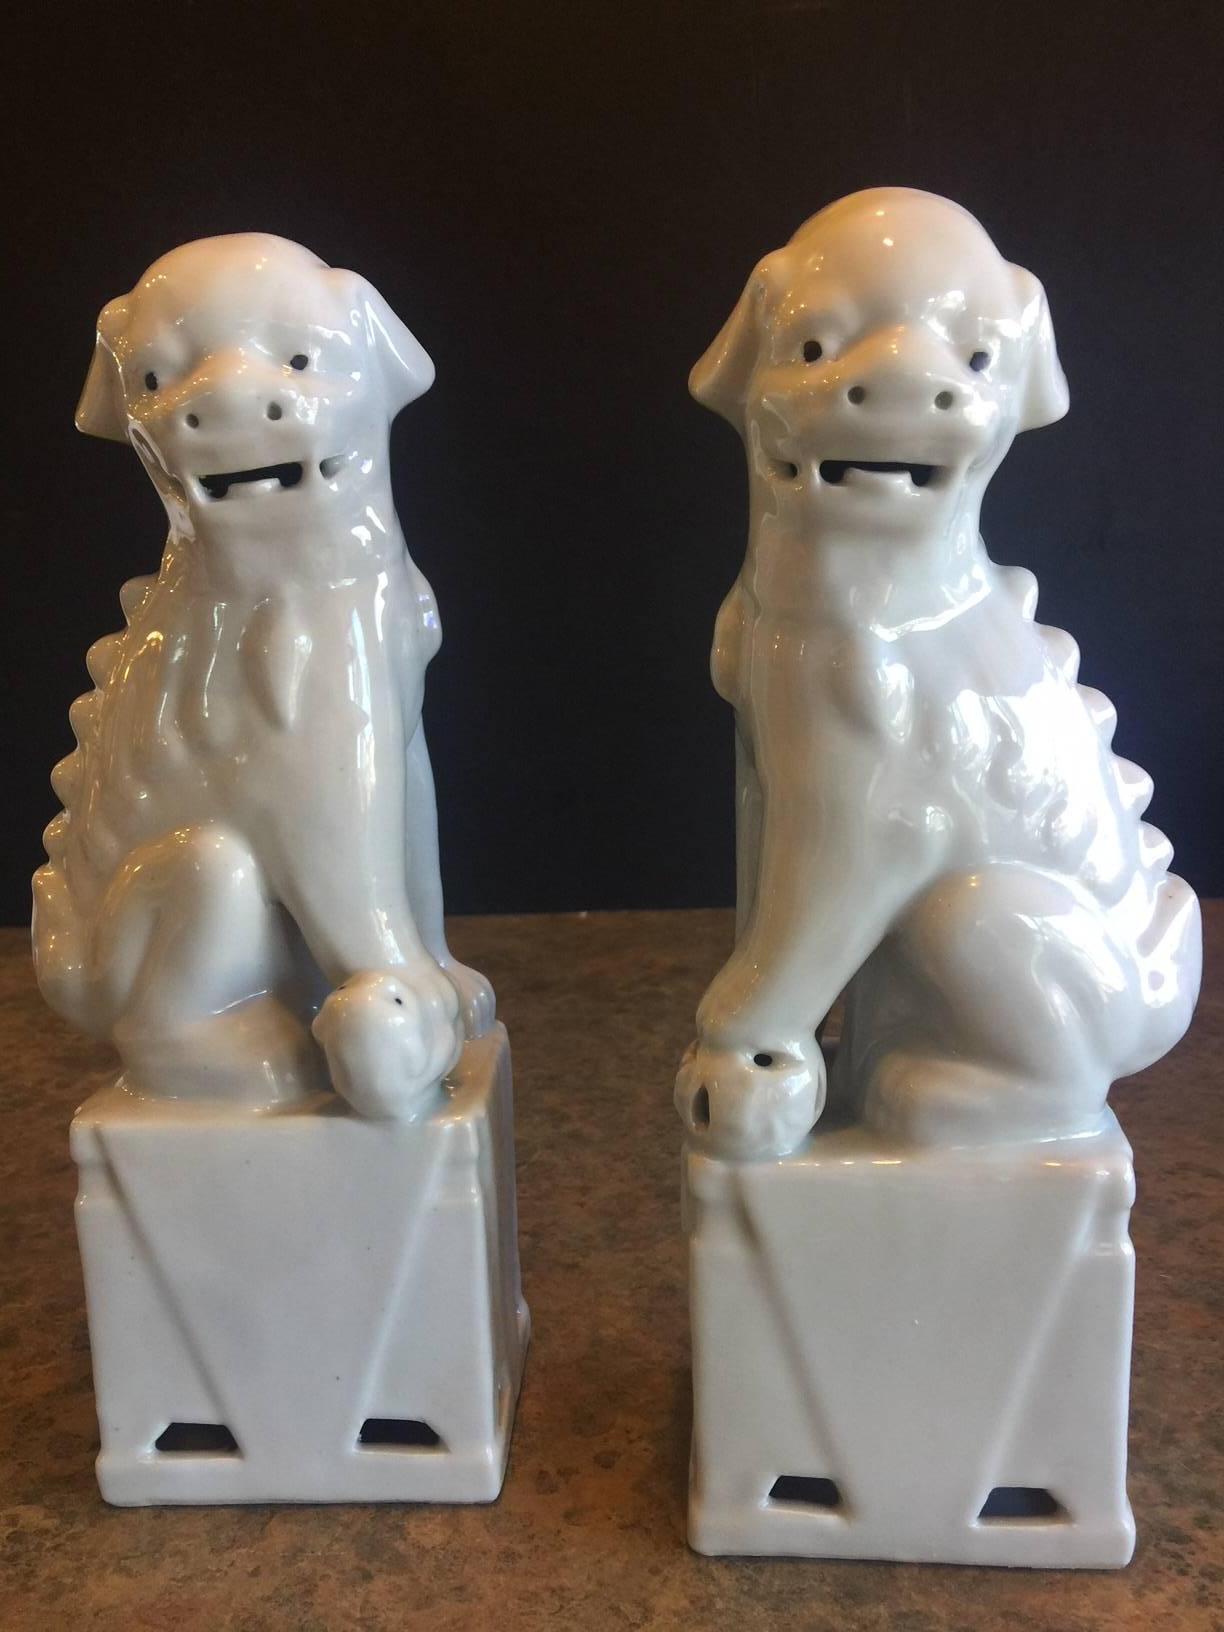 A very nice pair of Chinese, white, ceramic foo dogs, circa 1960s. Excellent condition and patina; makes a great pair of book ends or a fun decor item in any room!